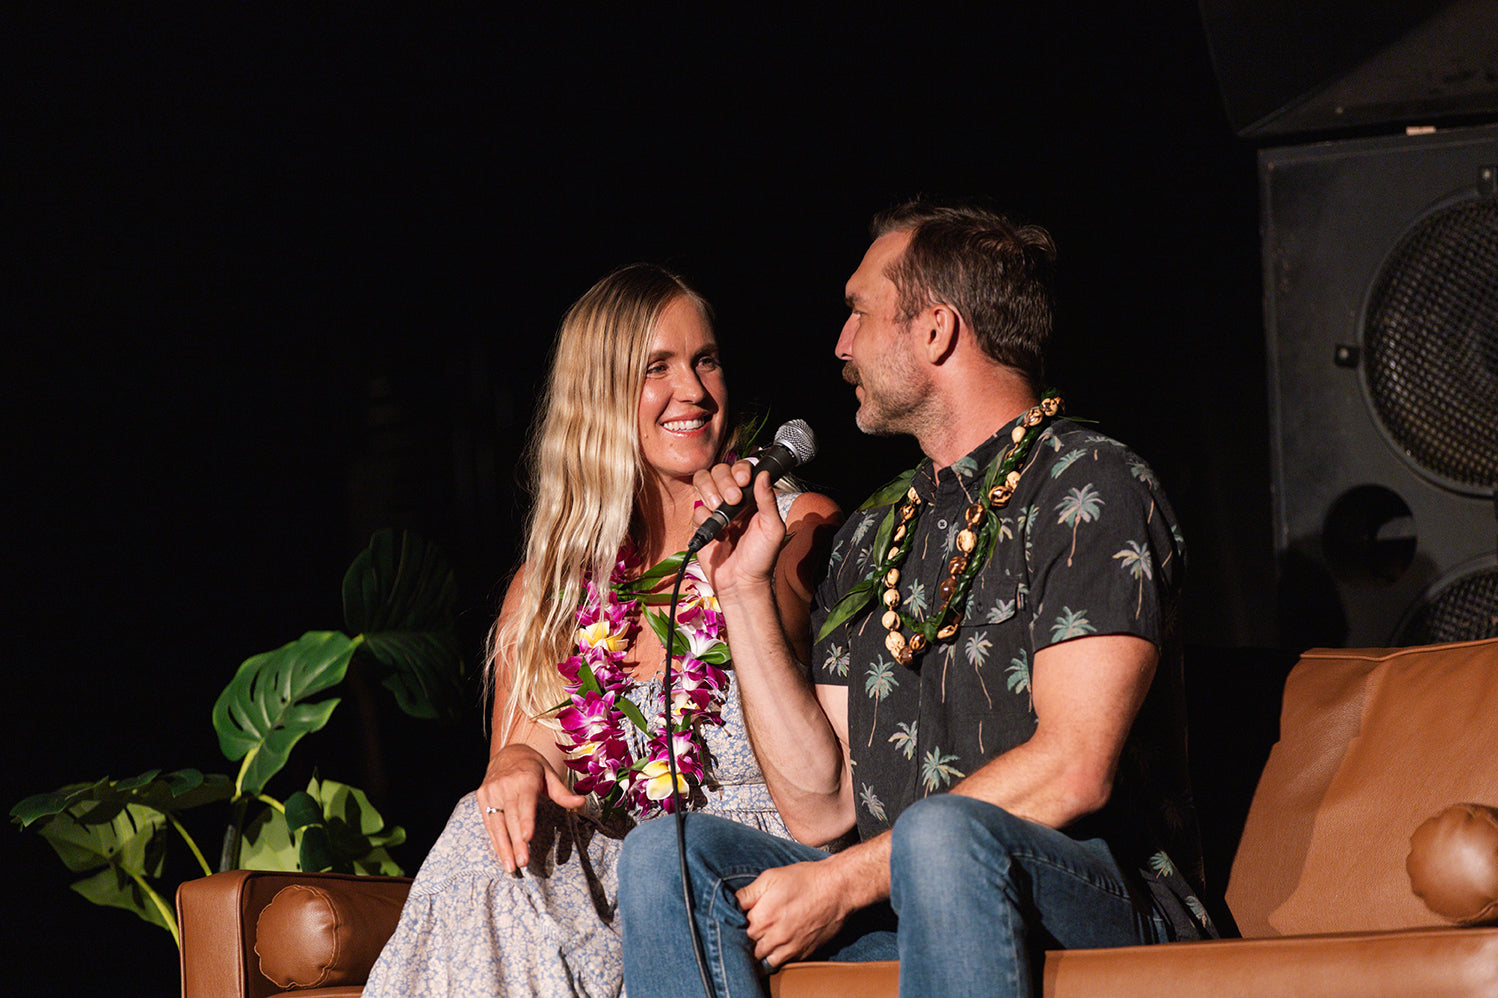 Bethany Hamilton smiling at her husband, Adam, who is retelling a funny story.